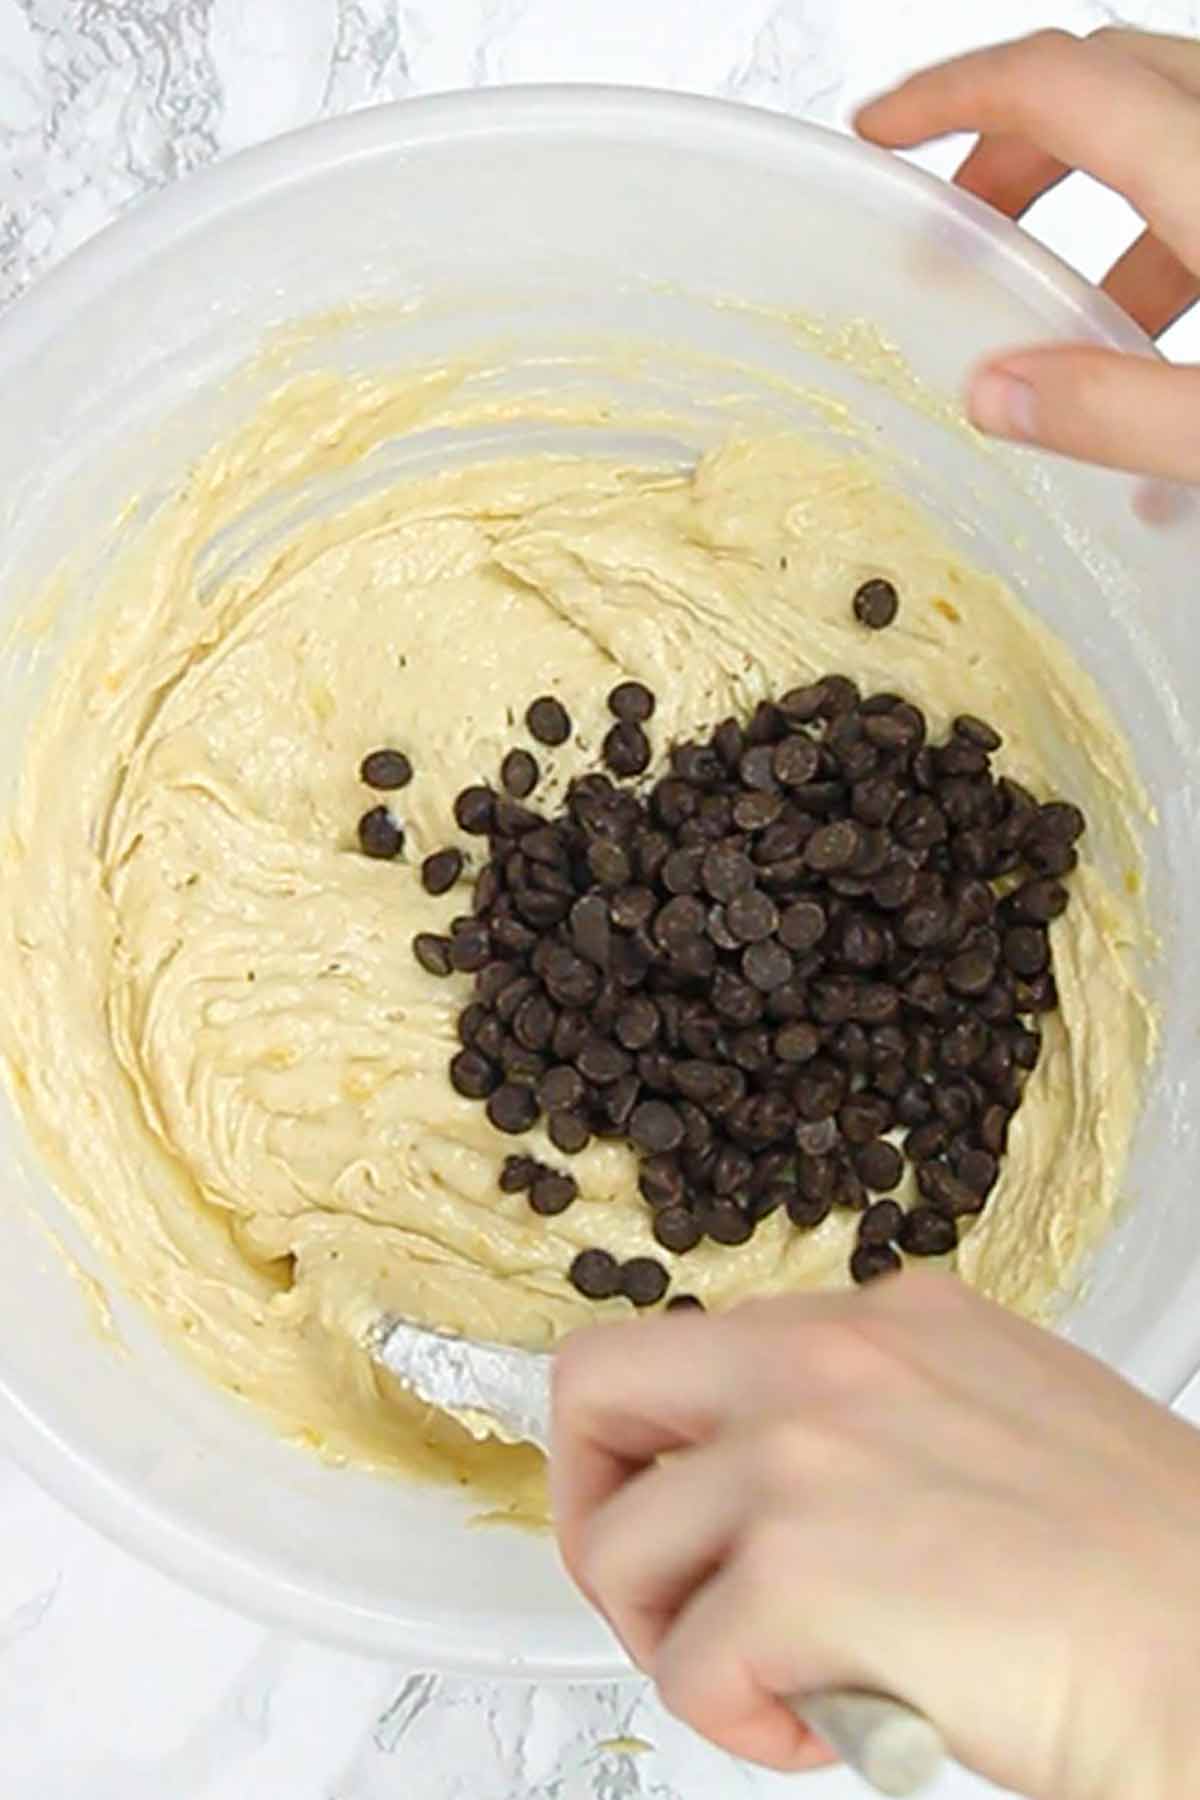 Adding Chocolate Chips To The Banana Bread Batter